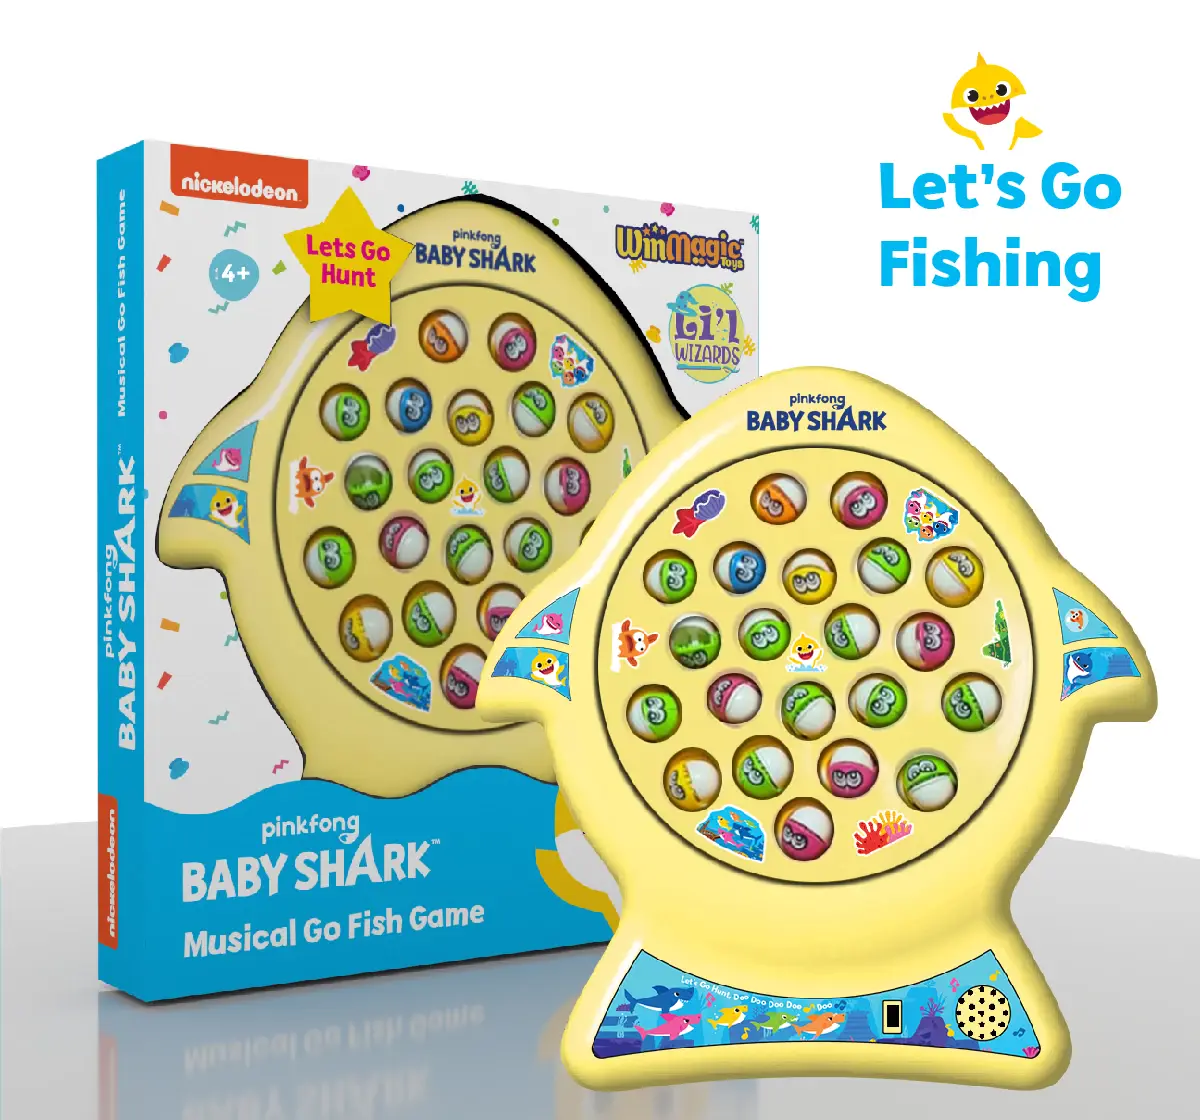 Li'l Wizards Baby Shark Sing and Go Fishing Game For Kids of Age